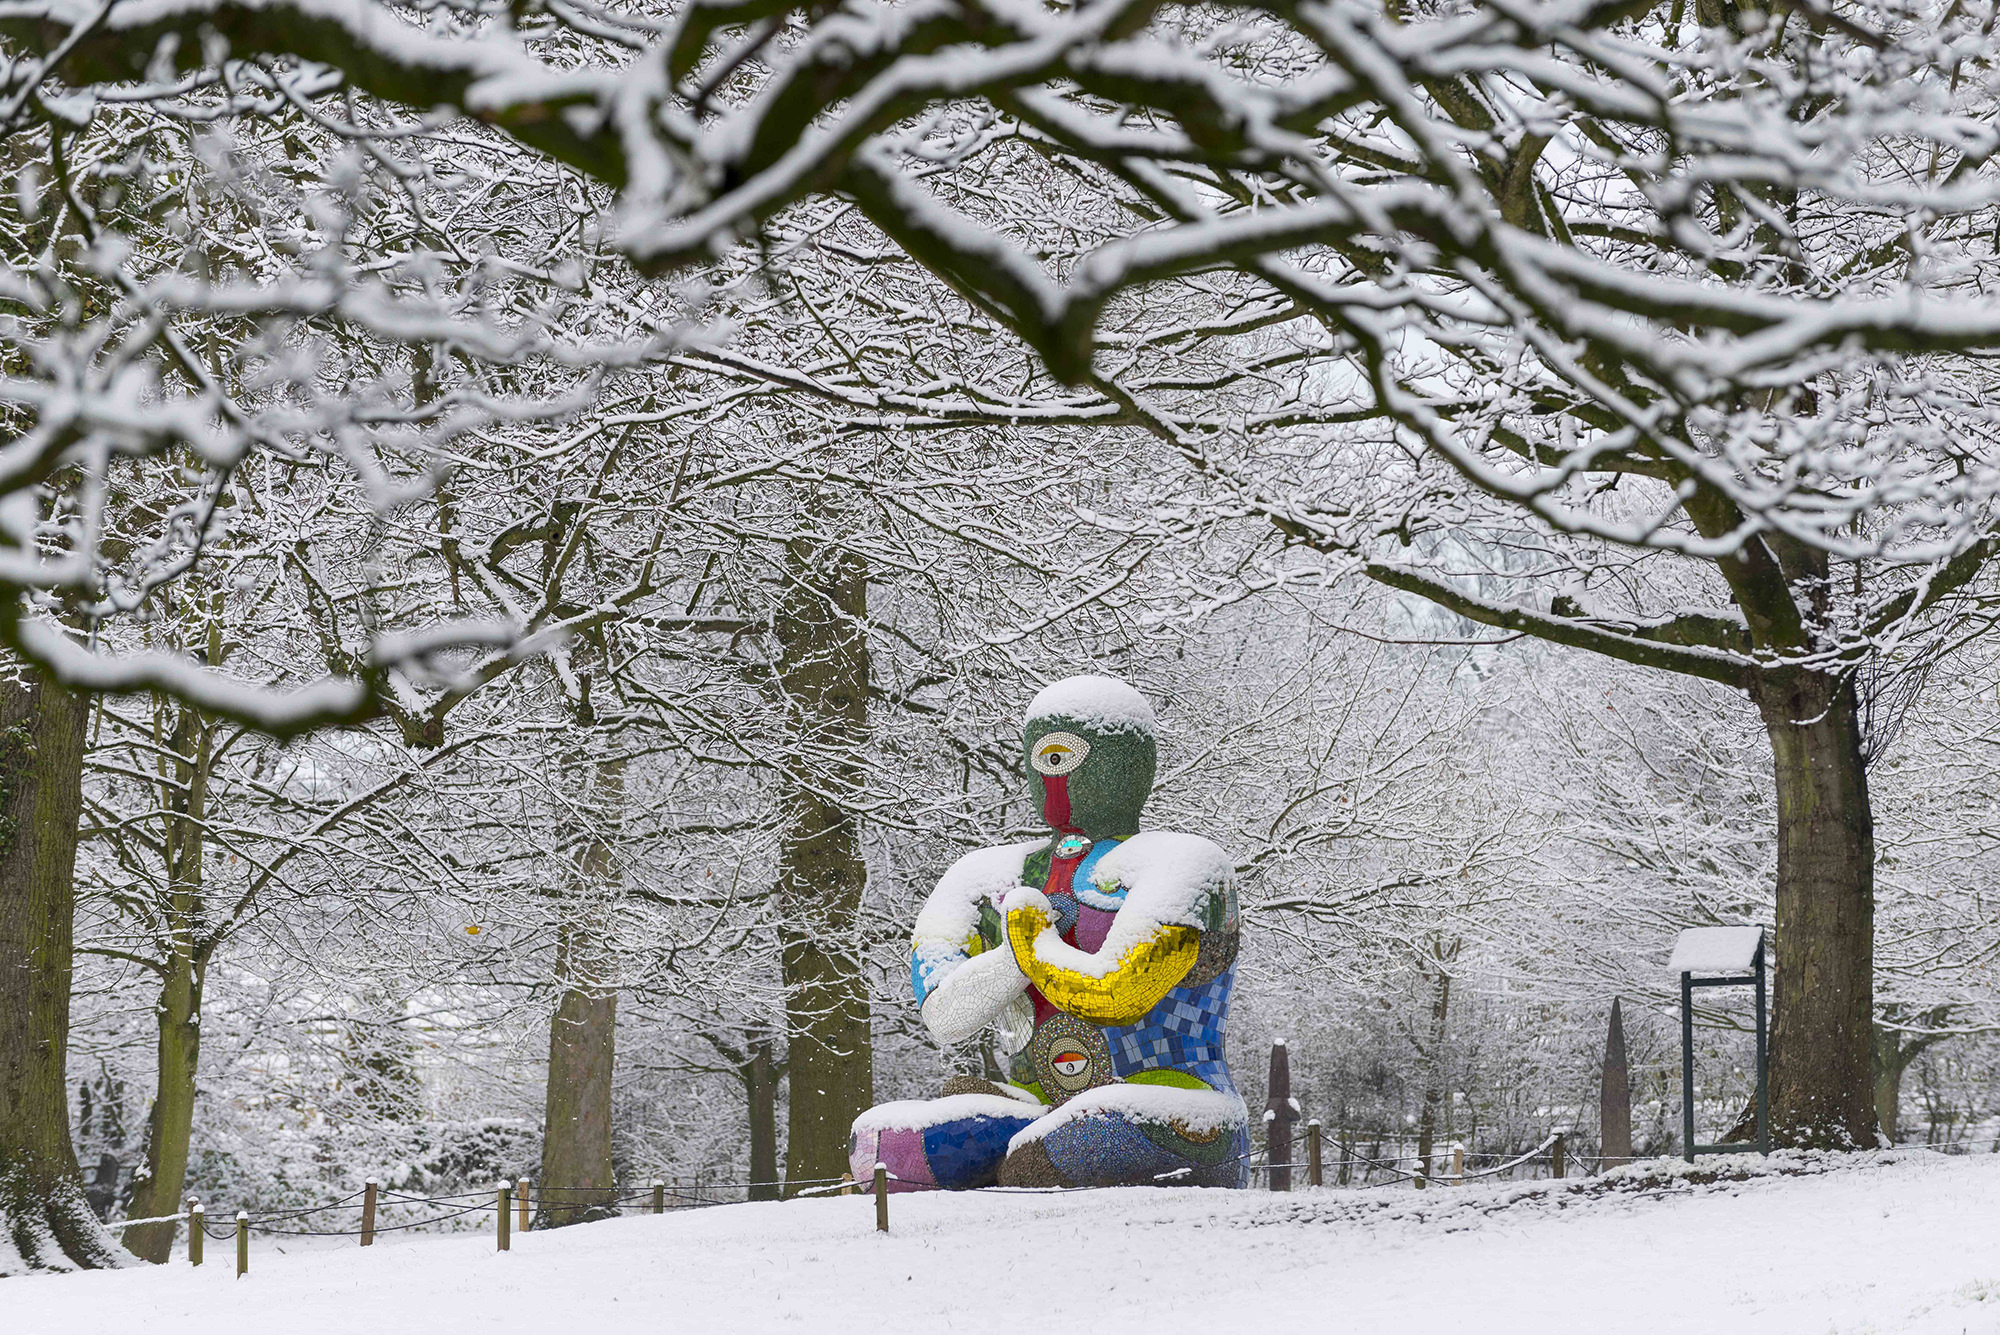 A seated humanoid figure covered in brightly coloured mosaic tiles in the snow